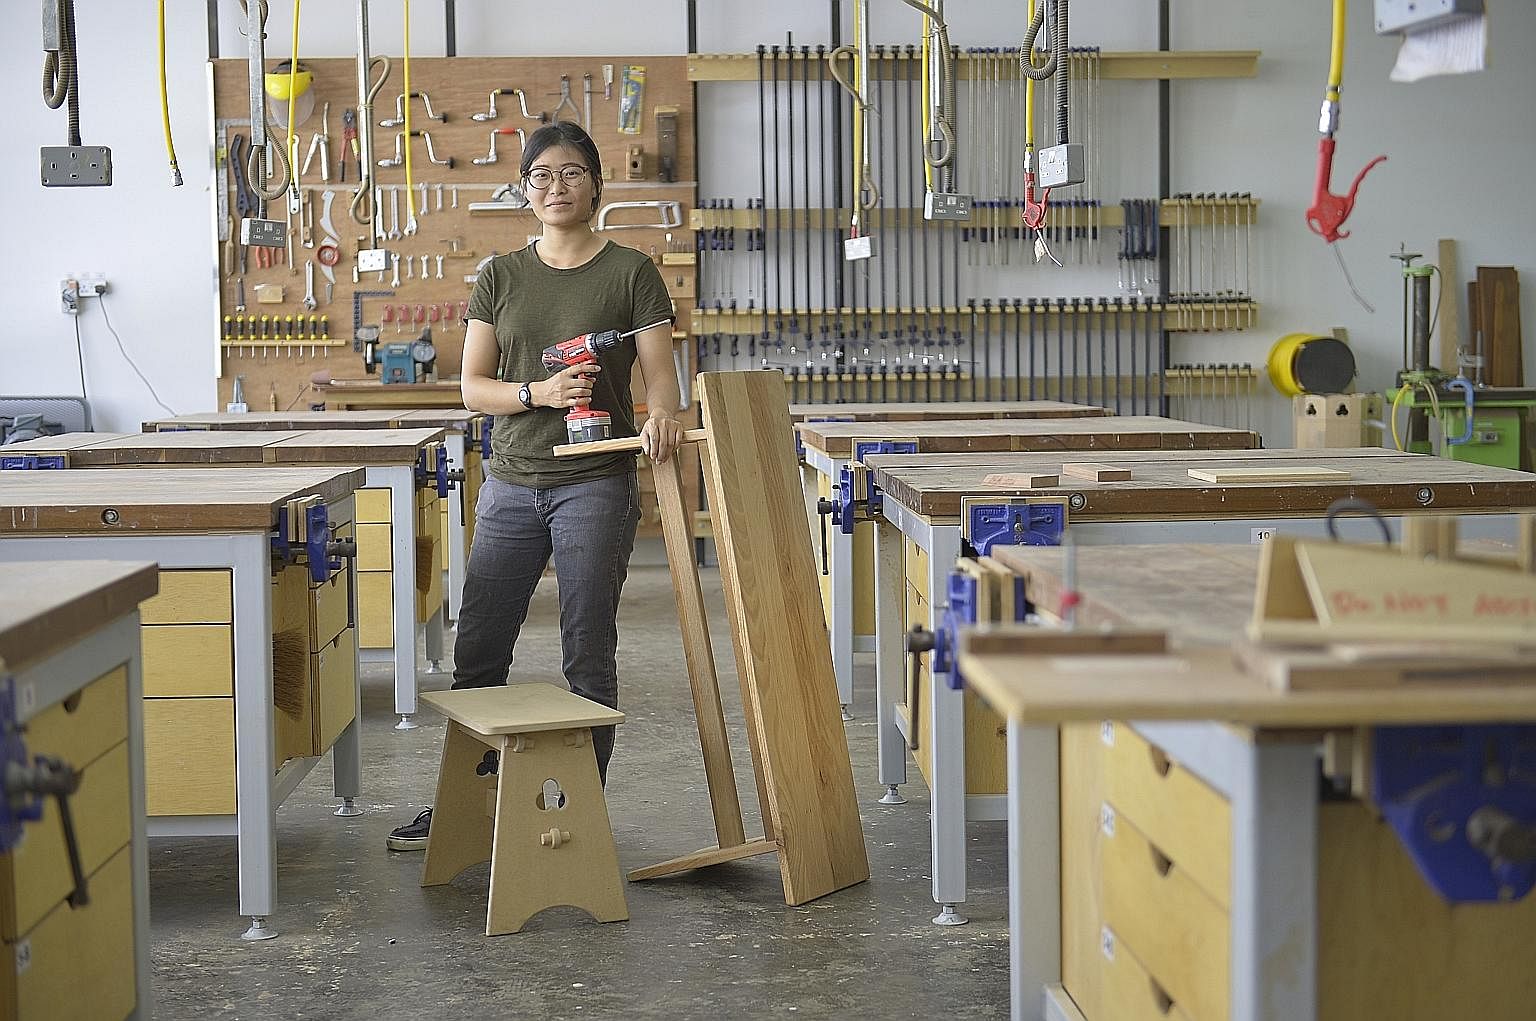 Ms Kwa Mei Jun at the Singapore Furniture Industries Council Institute's training workshop in Sungei Kadut. After her A levels, she did a one-year wood craftsmanship apprentice course run by the institute, where she worked in a furniture factory and 